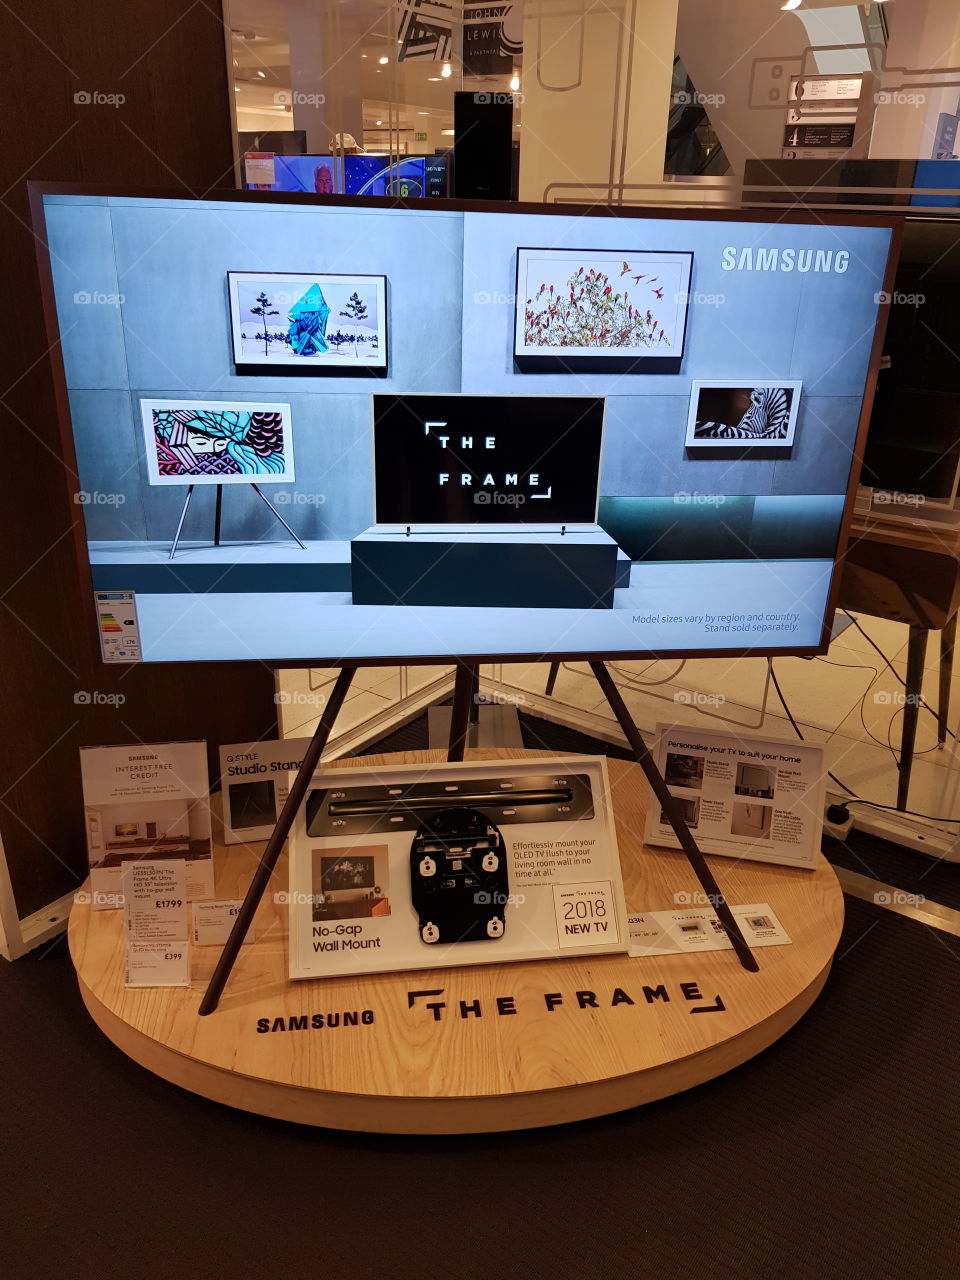 Samsung The Frame 4K UHD television installation on studio stand easel at Peter Jones Sloane square Chelsea King's road London